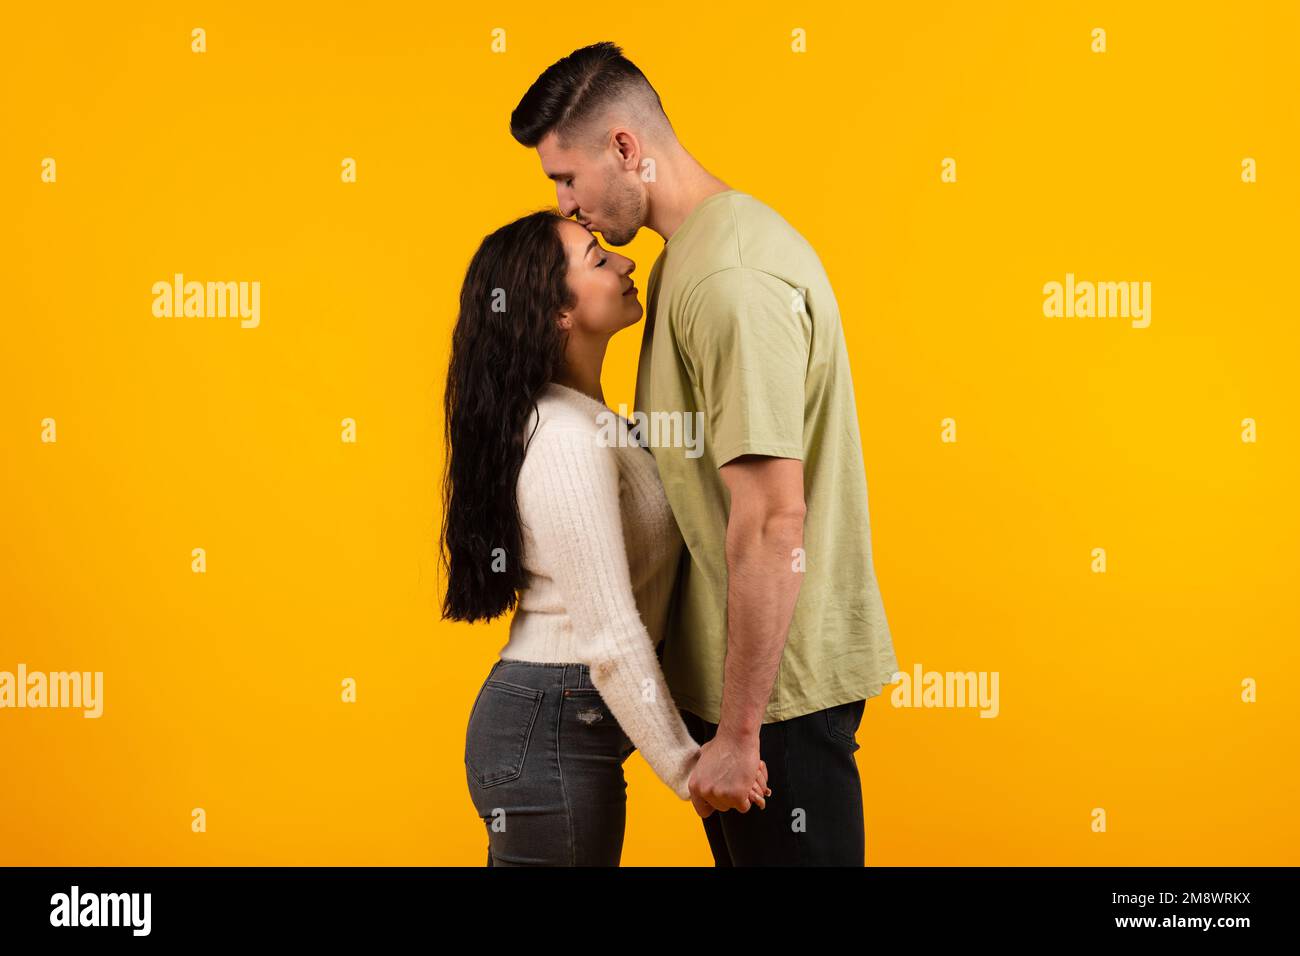 Cheerful millennial arab tall husband kissing wife on forehead, couple enjoy free time and tender moment Stock Photo